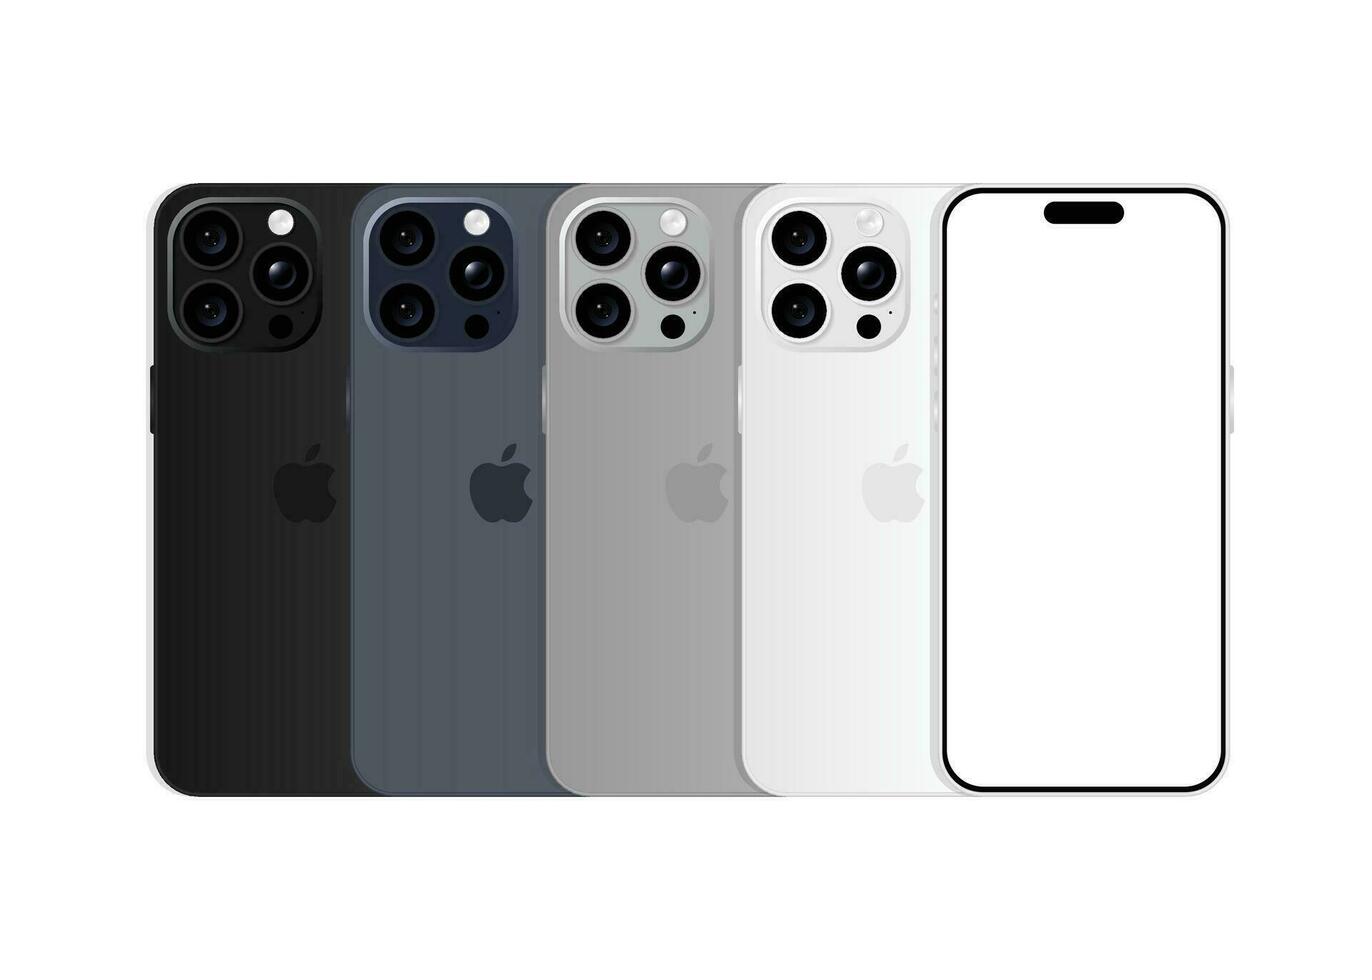 Iphone 15 Pro model. All colors. Front view and back view. Smartphone mockup with blank white screen for ui ux, app, web, presentation, design. Vector illustration